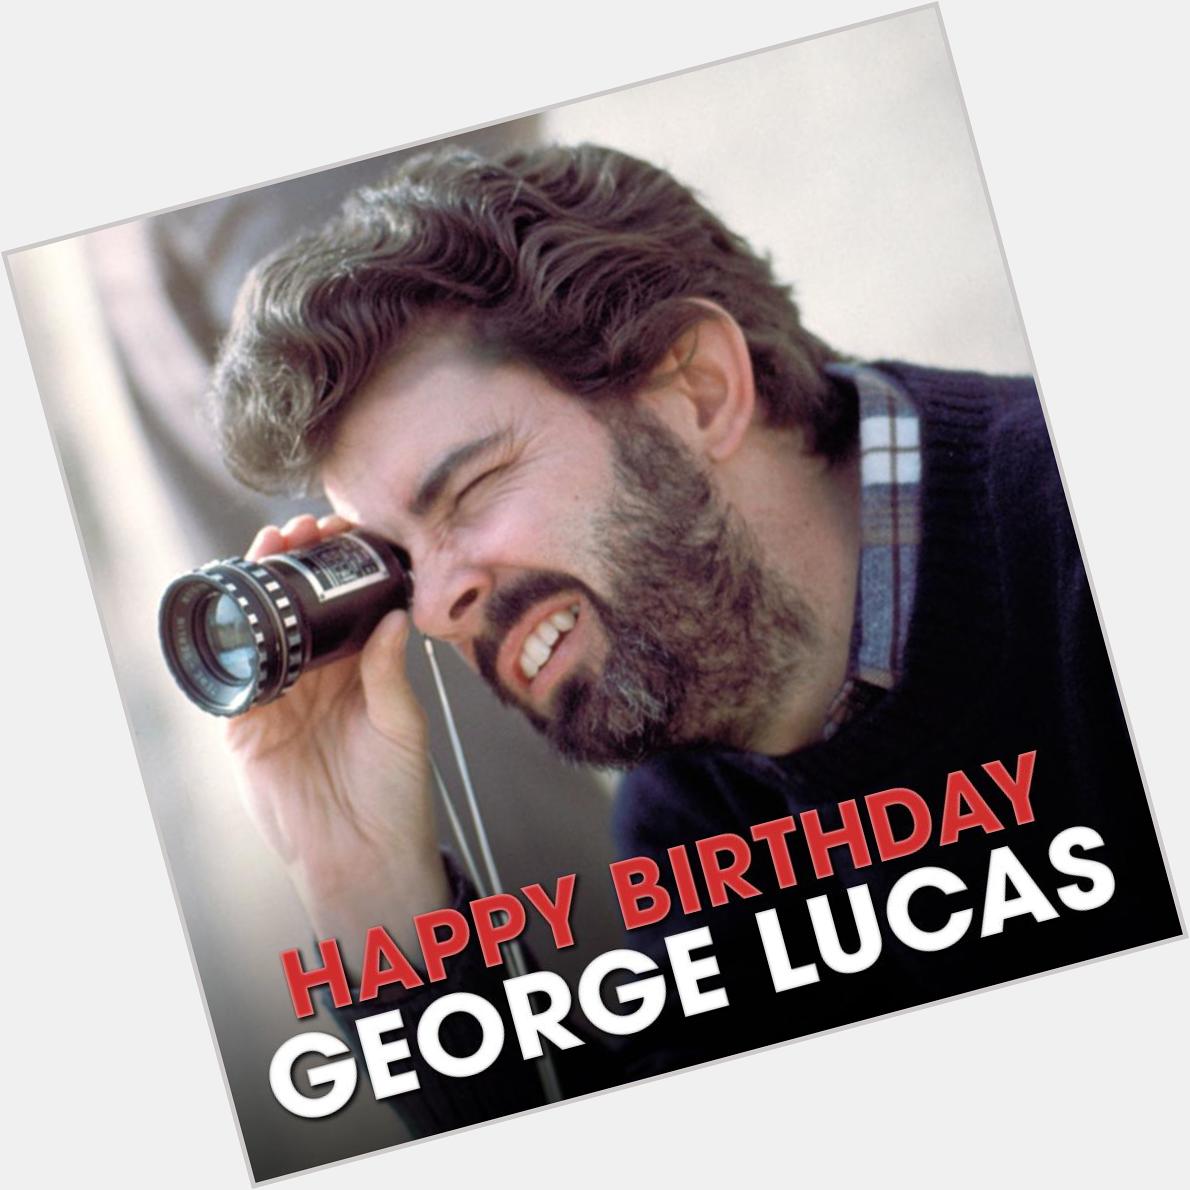 Join us in wishing a very Happy Birthday to The Maker himself, George Lucas. 